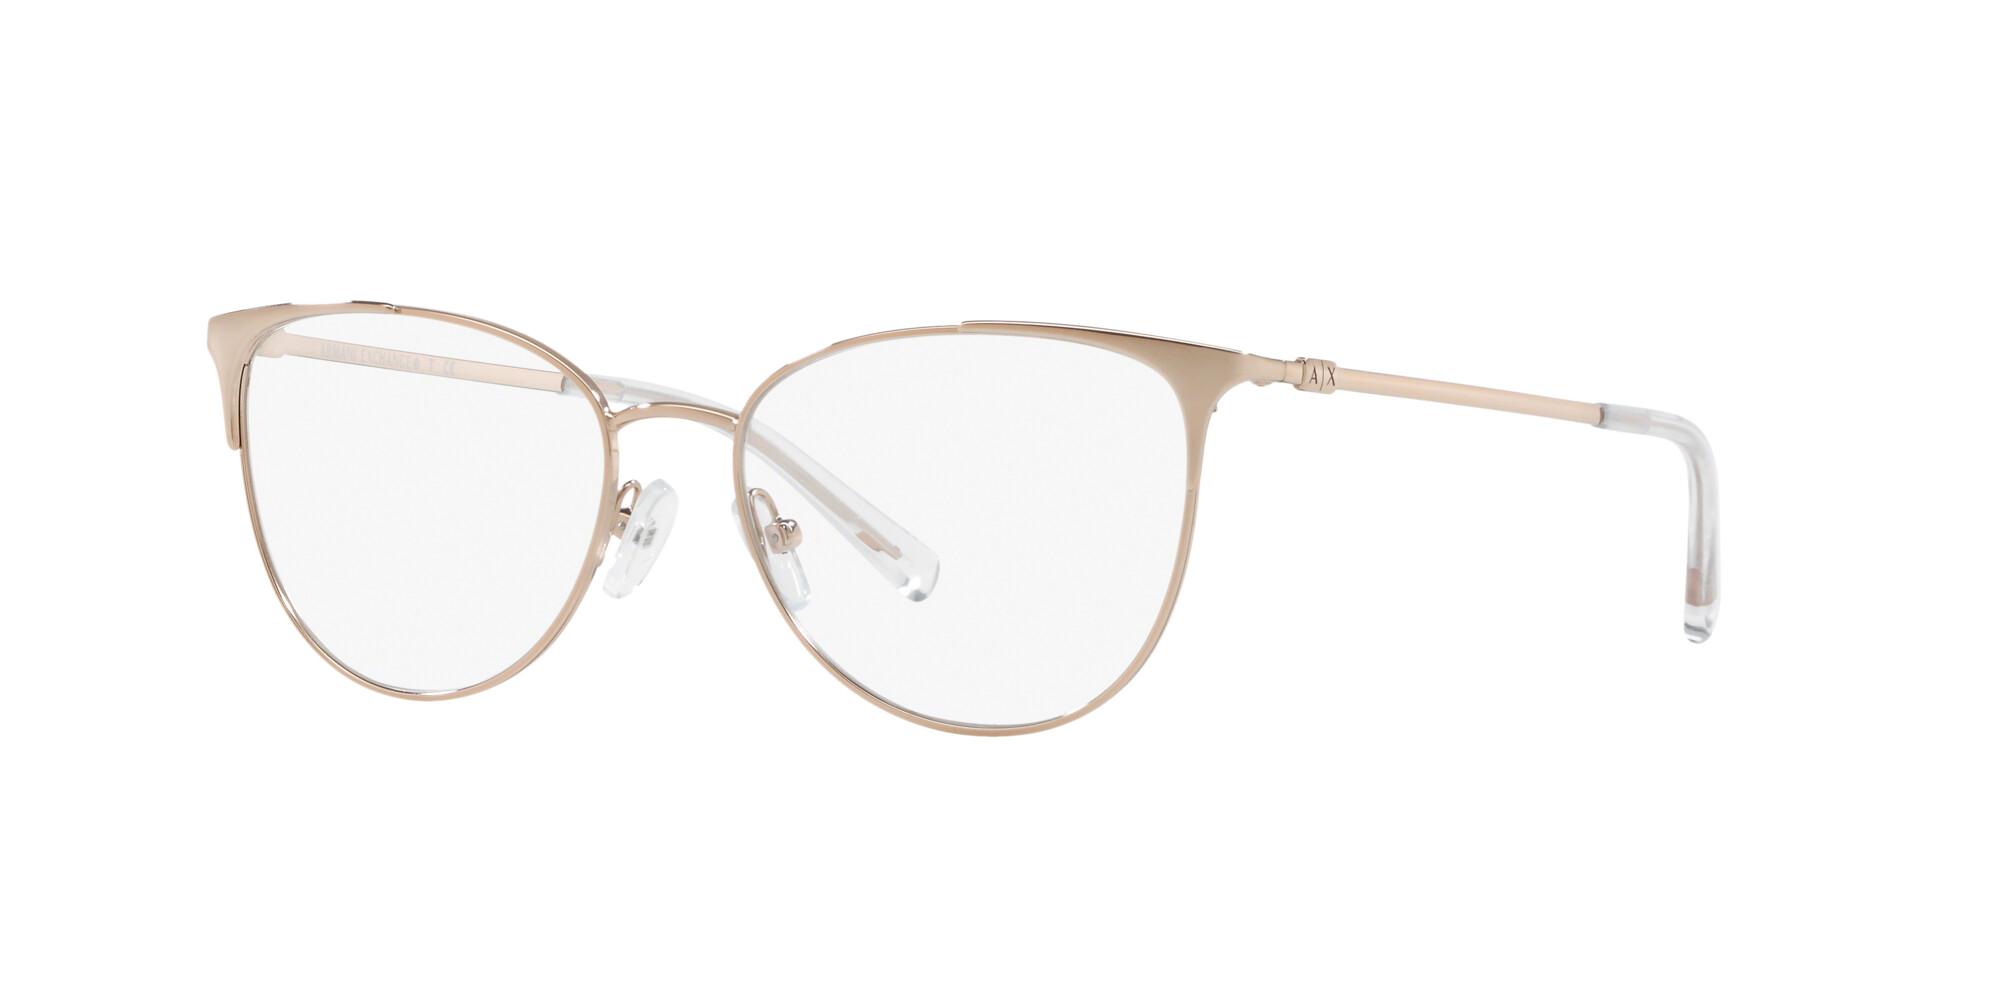 Angle_Left01 Armani Exchange 0AX1034 6103 Brille Pink Gold